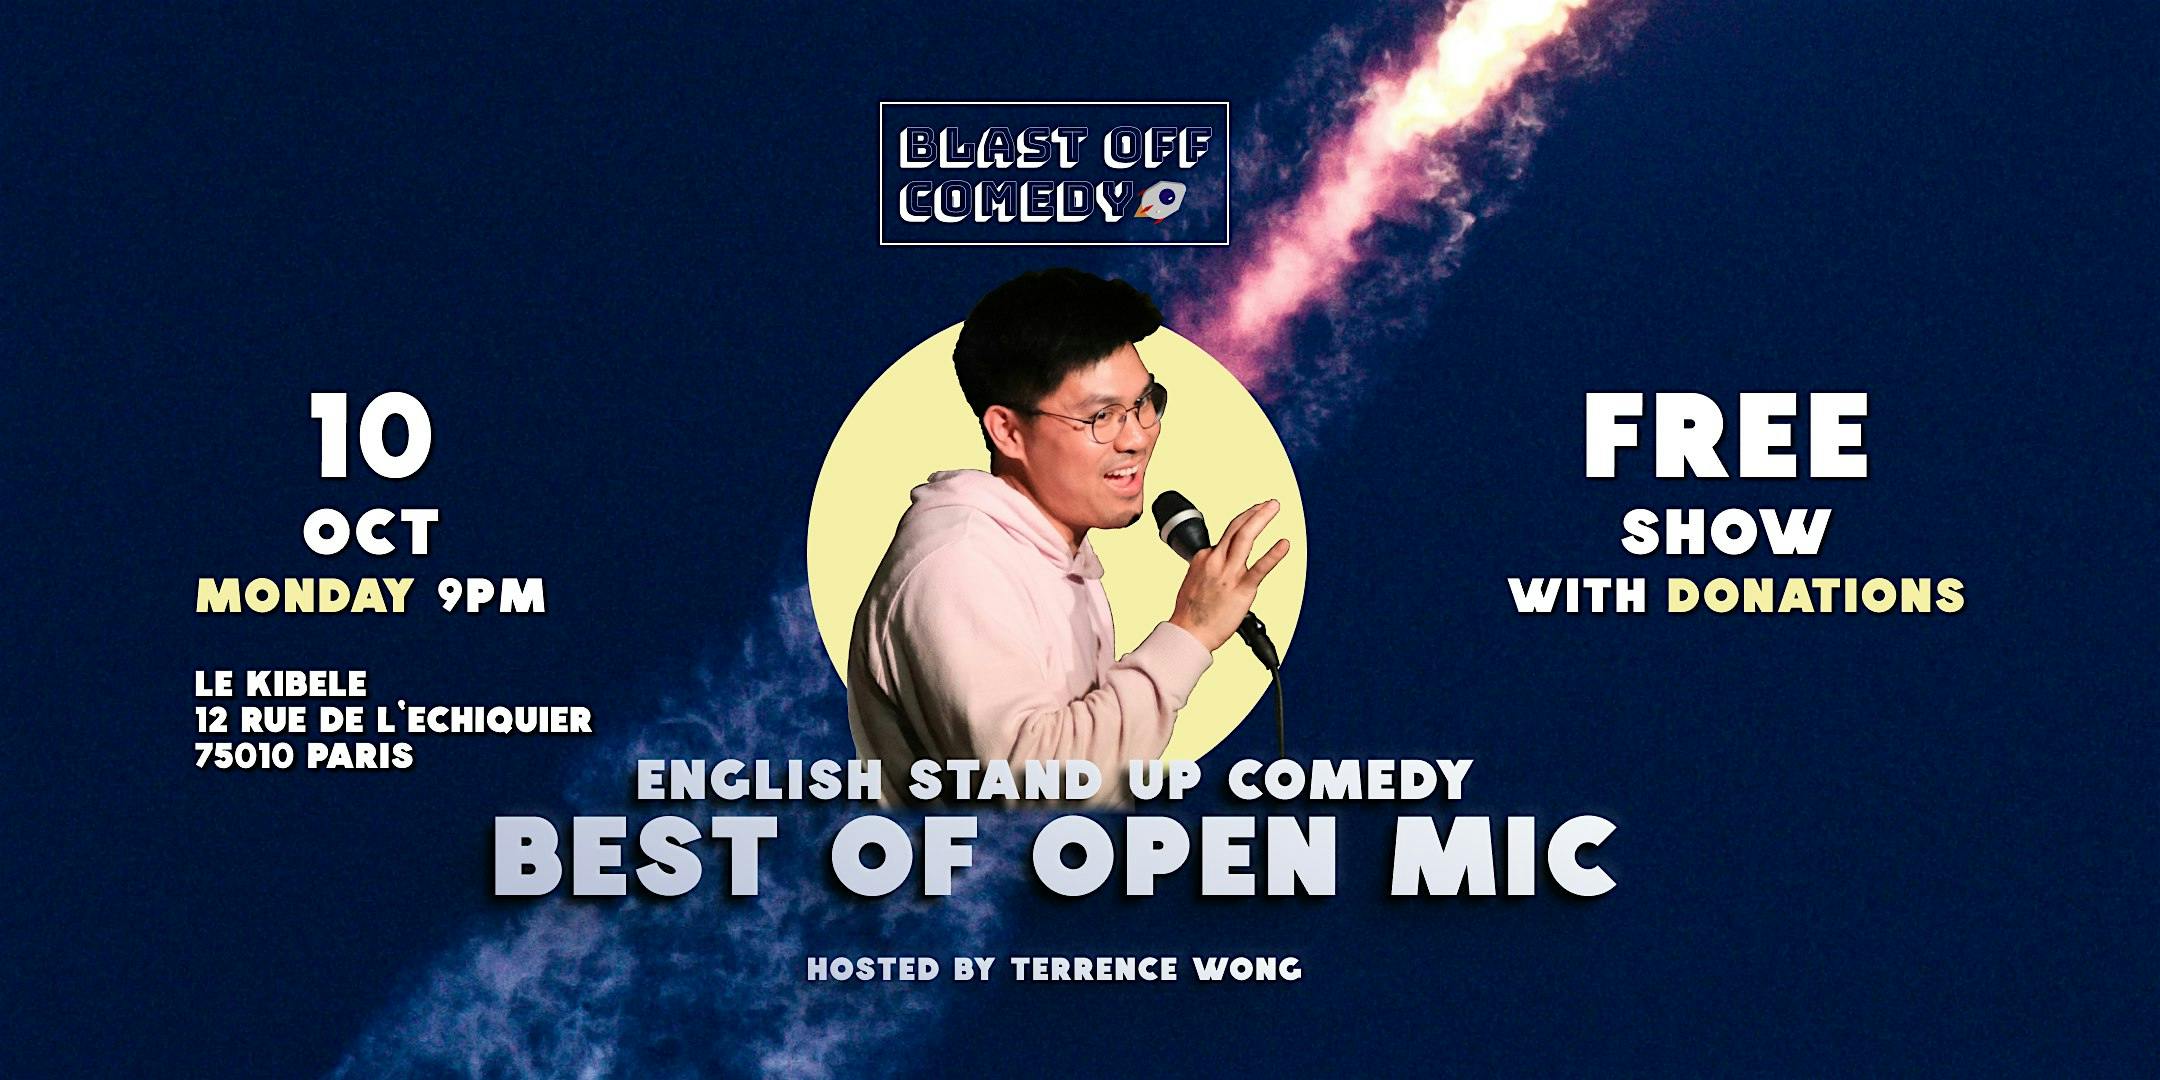 English Stand Up Comedy Best of Open Mic 10.10 - Blast Off Comedy logo